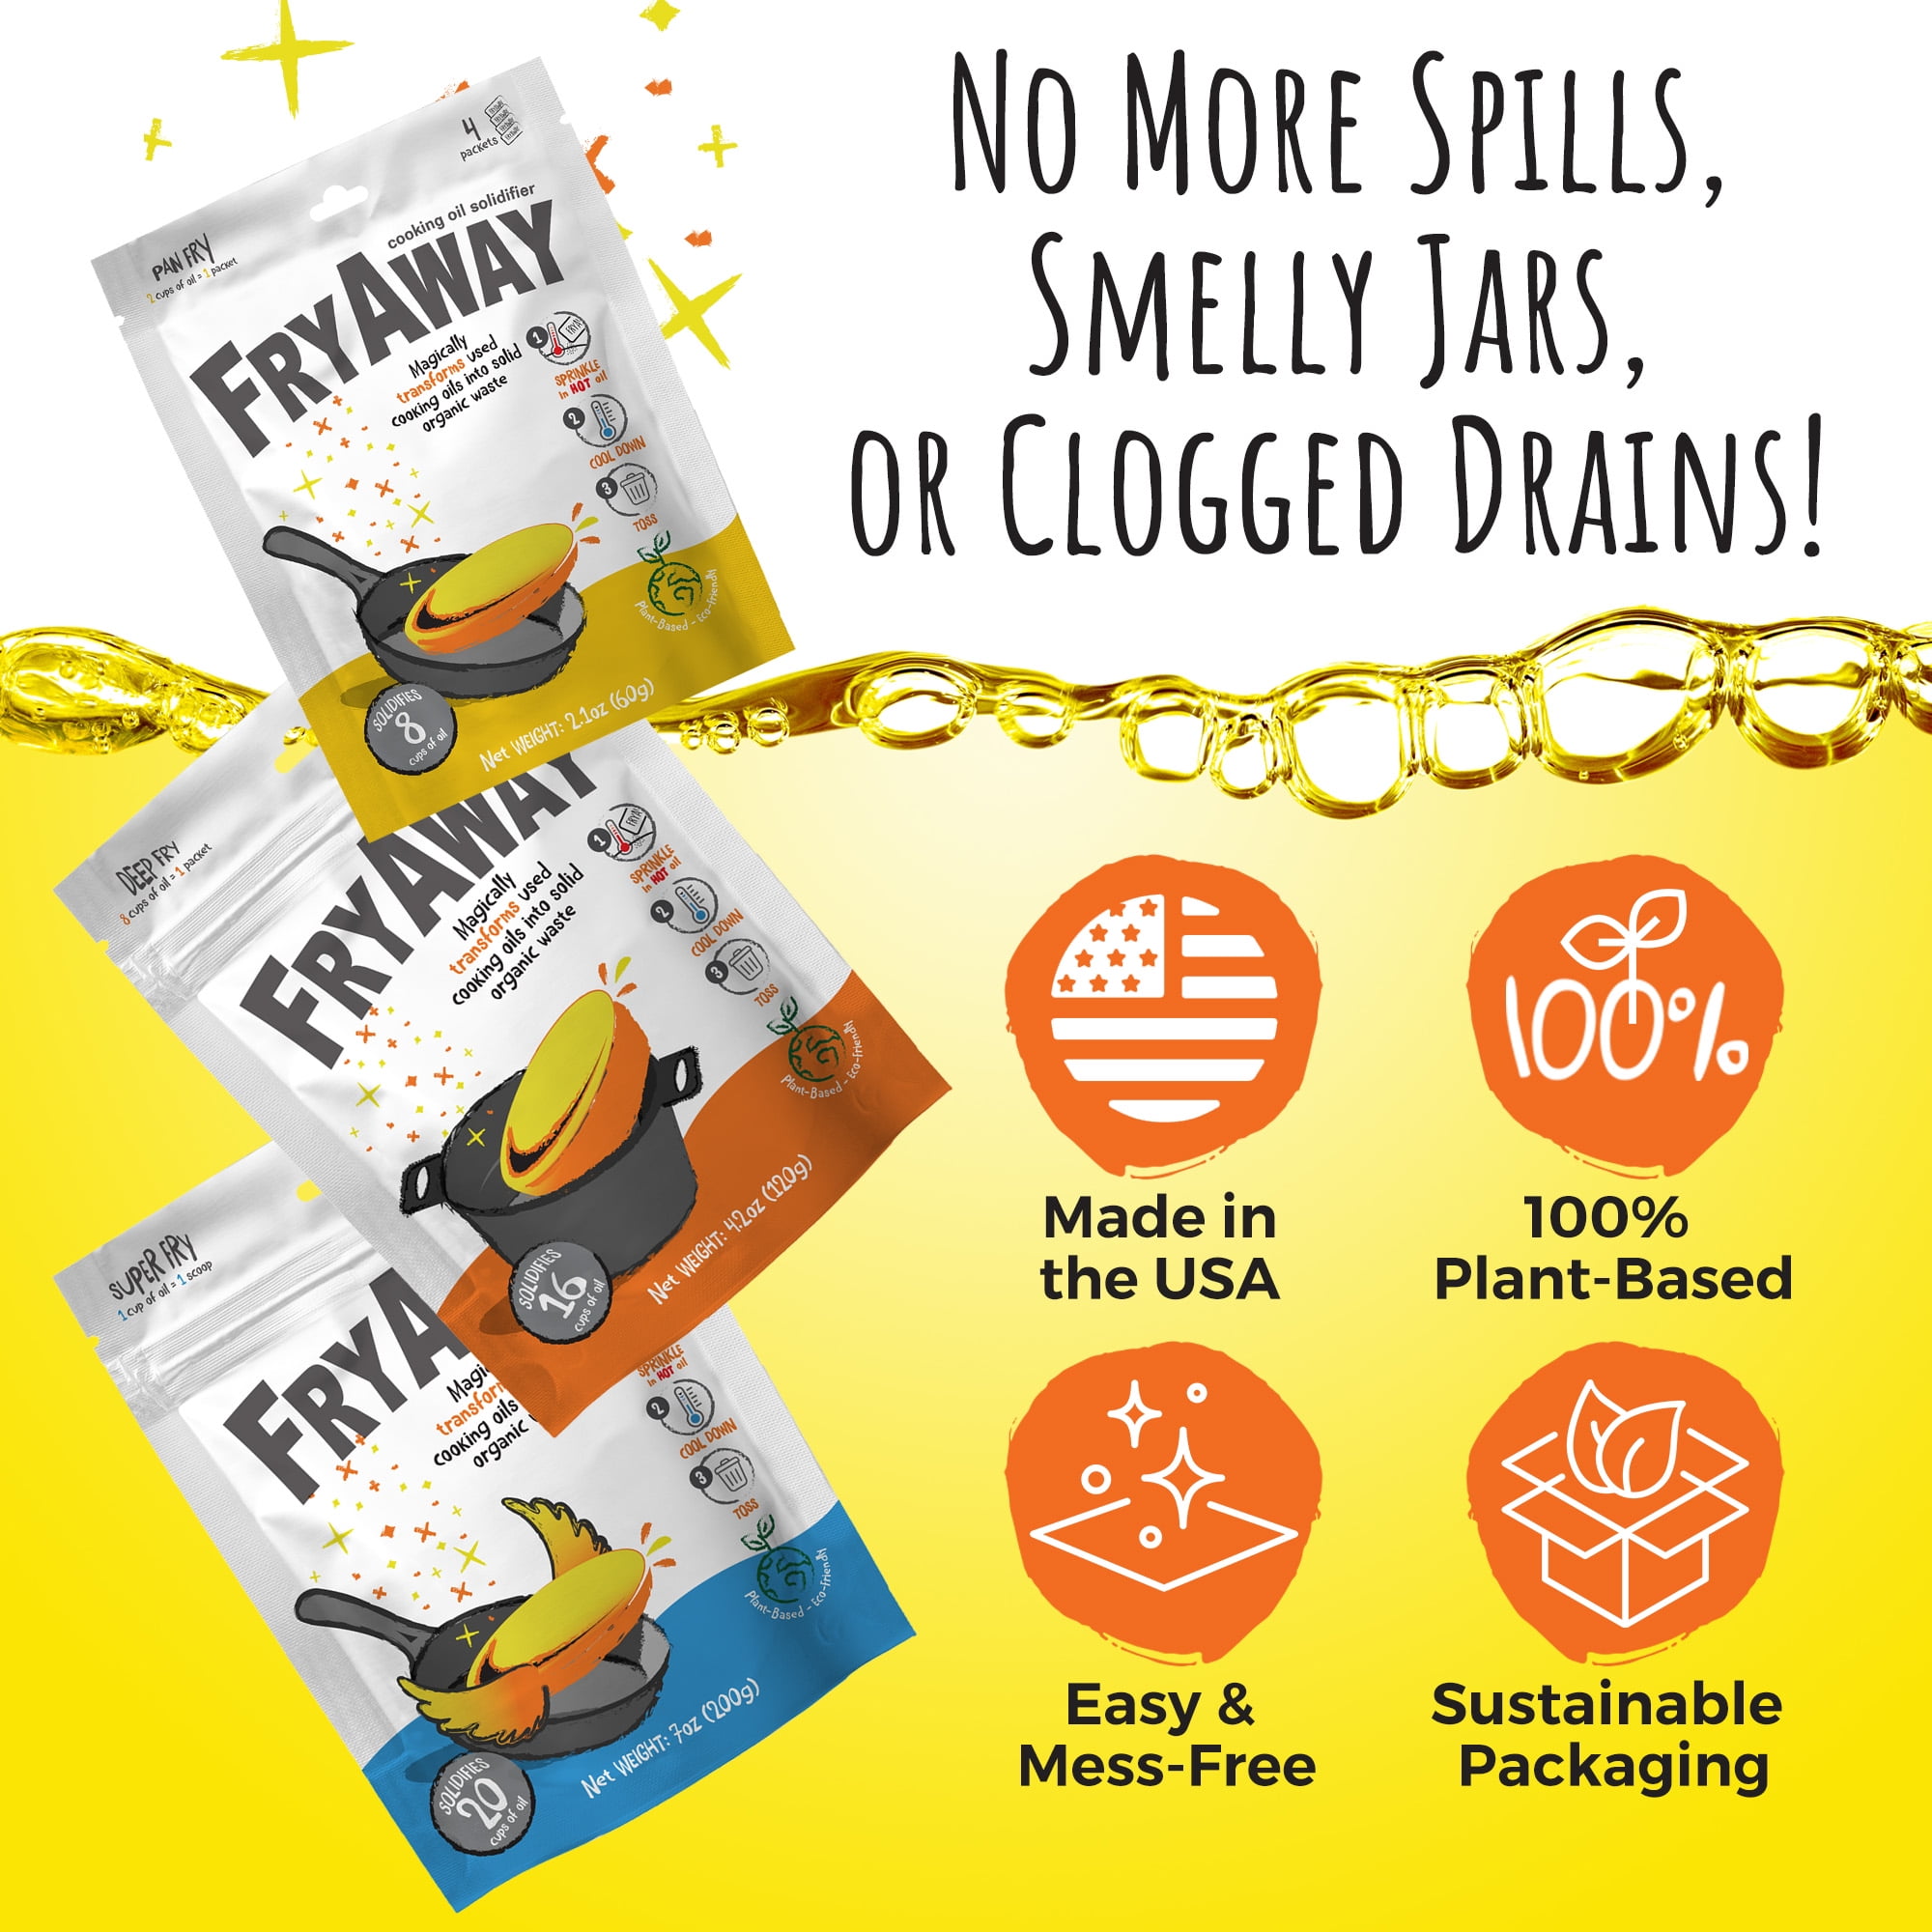 FryAway: Revolutionizing How to Dispose of Old Vegetable Oil and